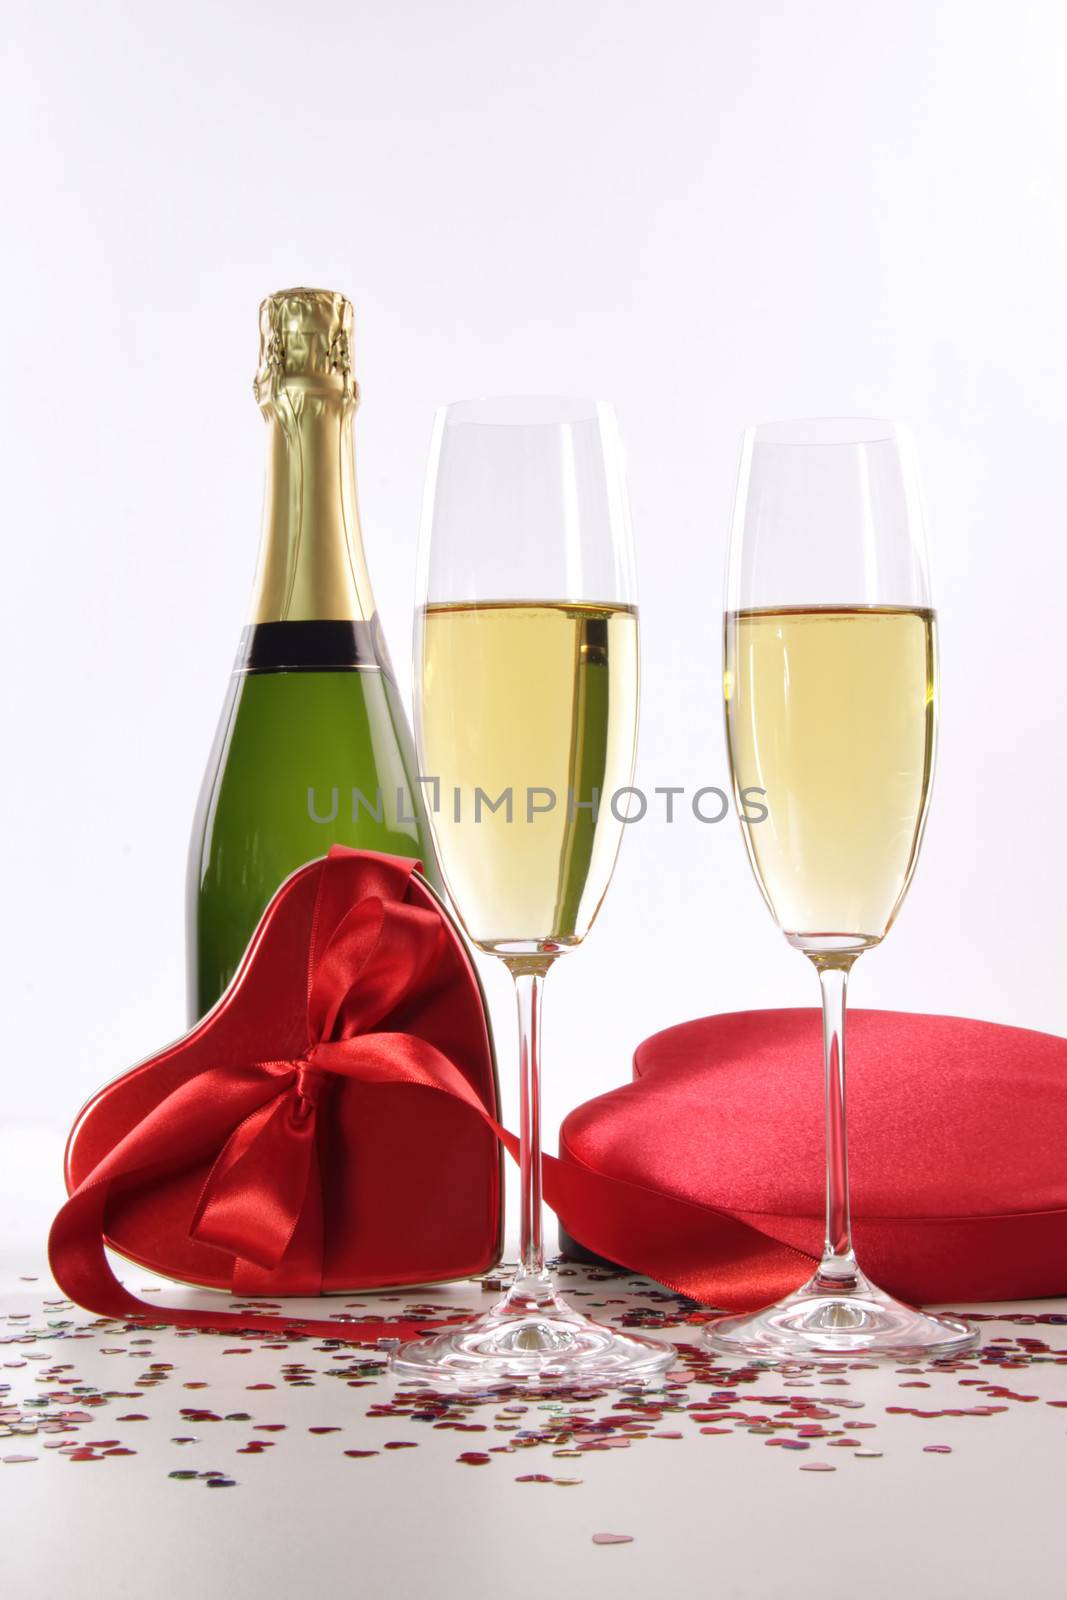 Champagne and chocolates for Valentine's Day